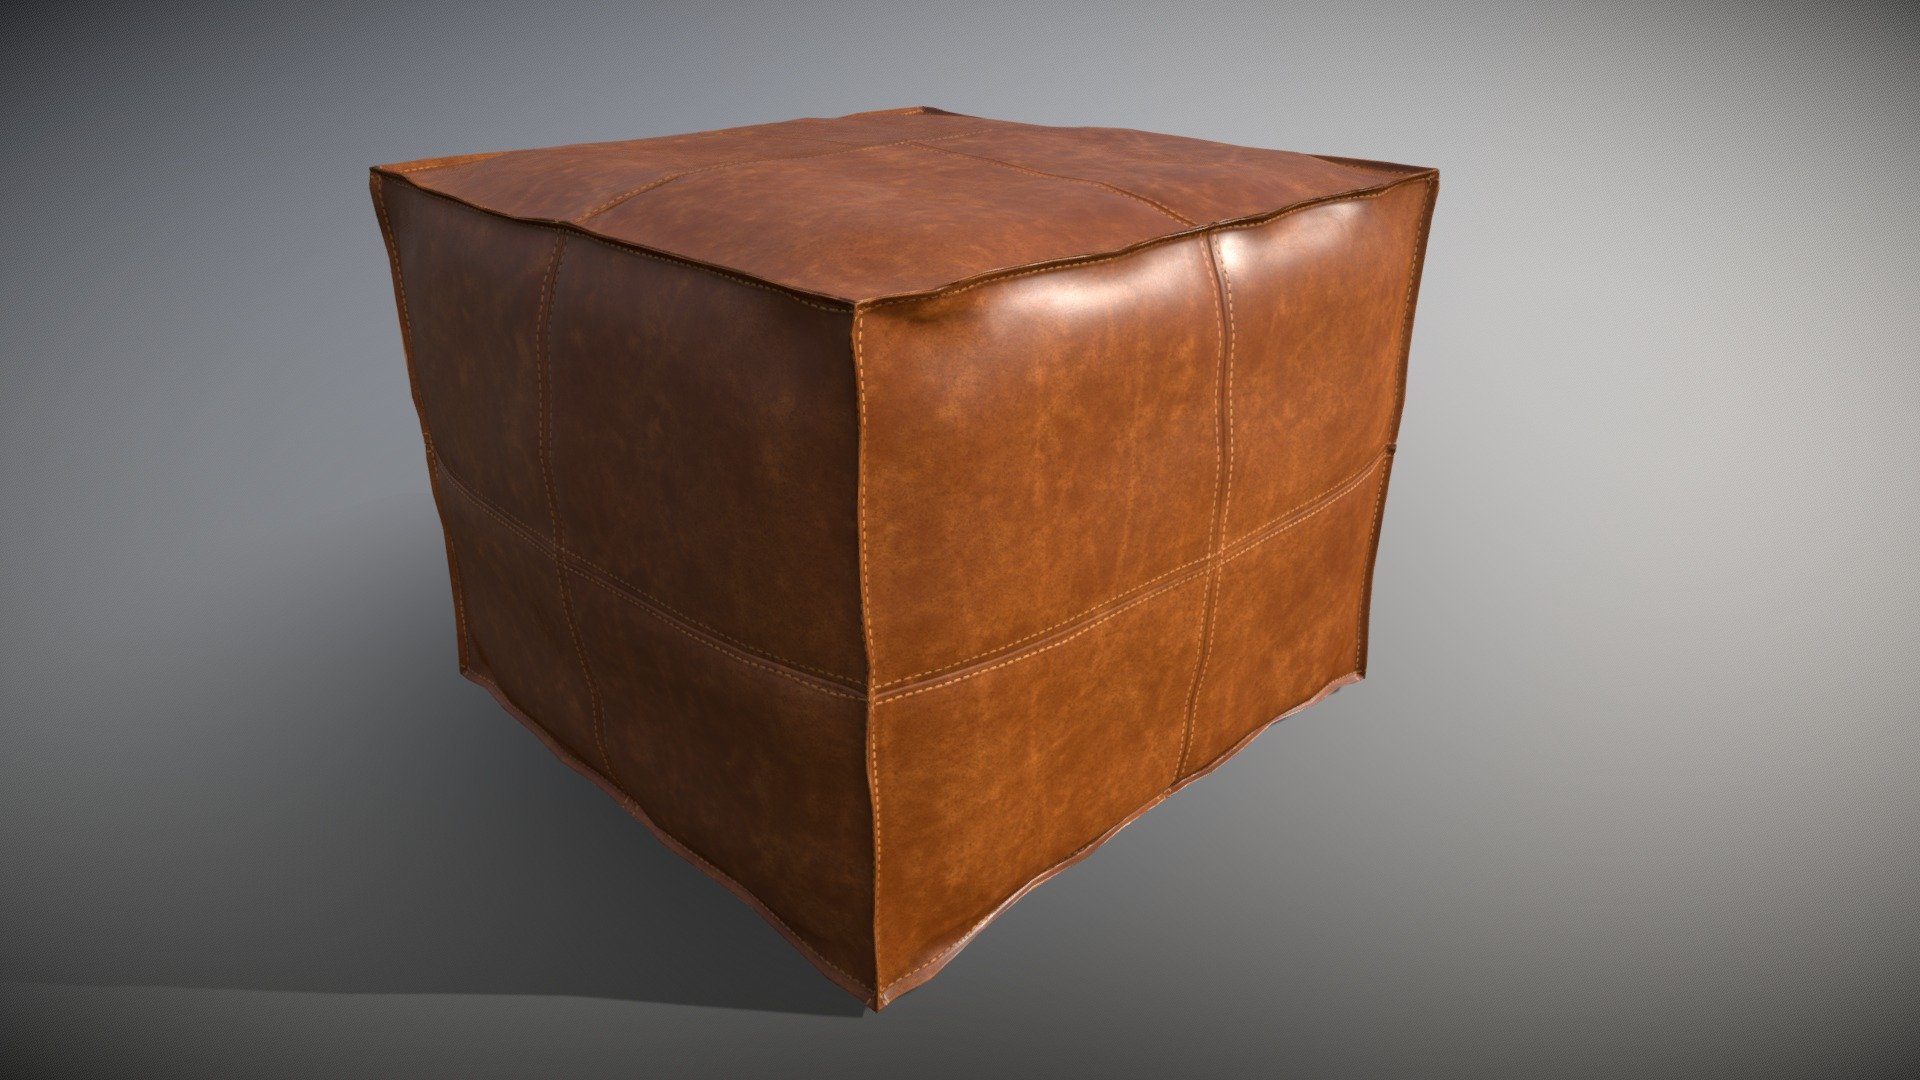 Leather Pouf